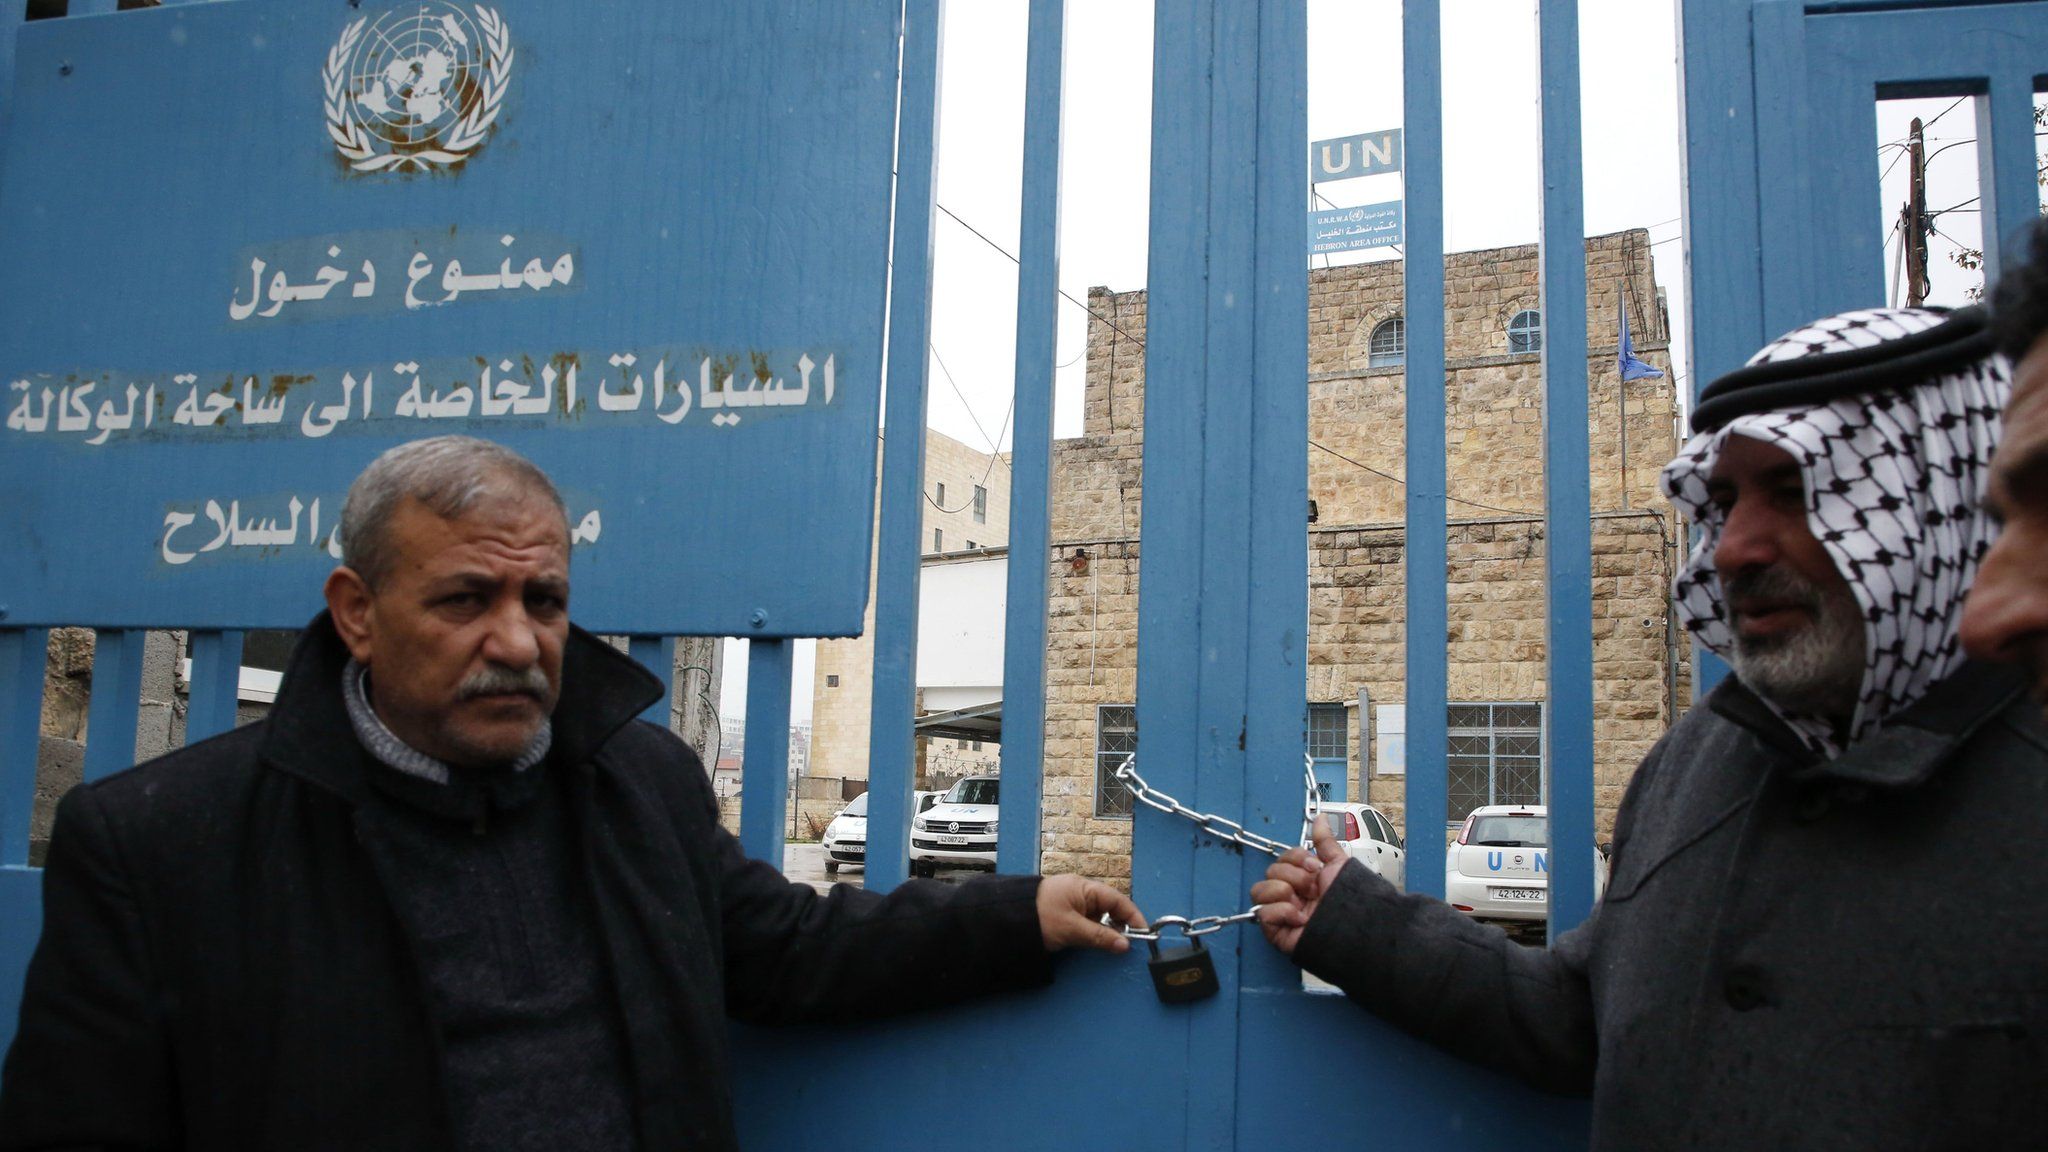 Palestinian men symbolically lock shut the gates of an Unrwa office in the West Bank city of Hebron on 17 January 2018